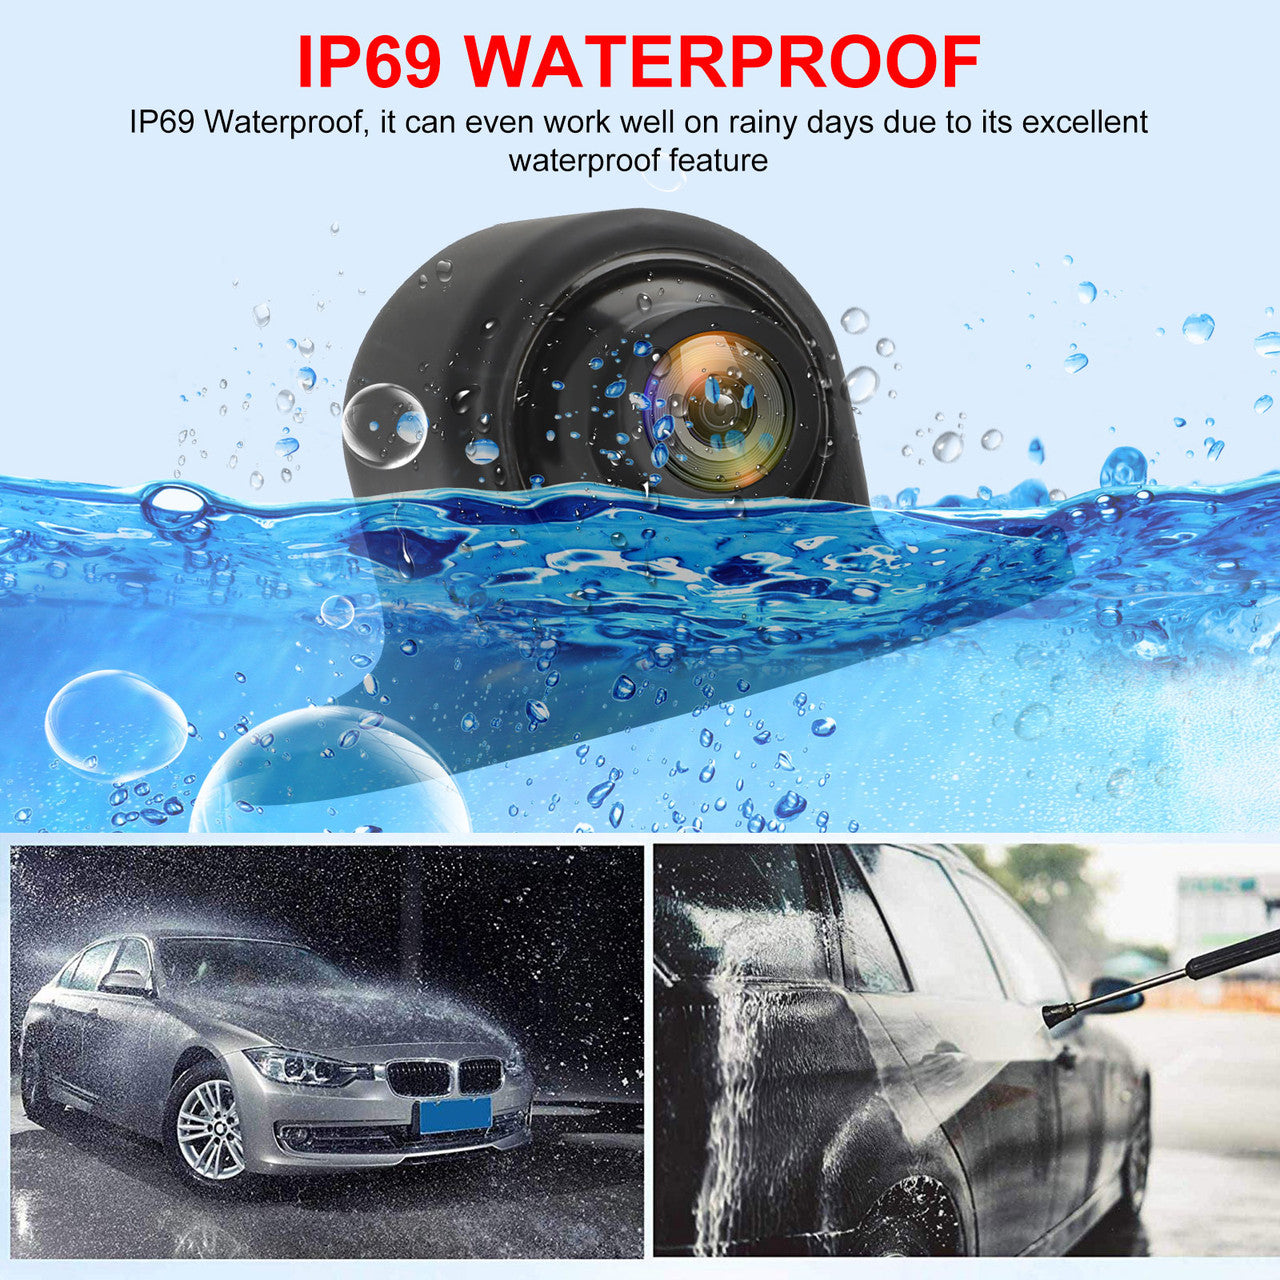 Front Backup Camera for Car, 170掳 Super Wide Angle Rear View Camera, 720P IP69 Waterproof Vehicle Reverse Camera HD Night Vision, Universal Car Camera for Truck SUV RV Van Jeep, 12V, Scale Lines